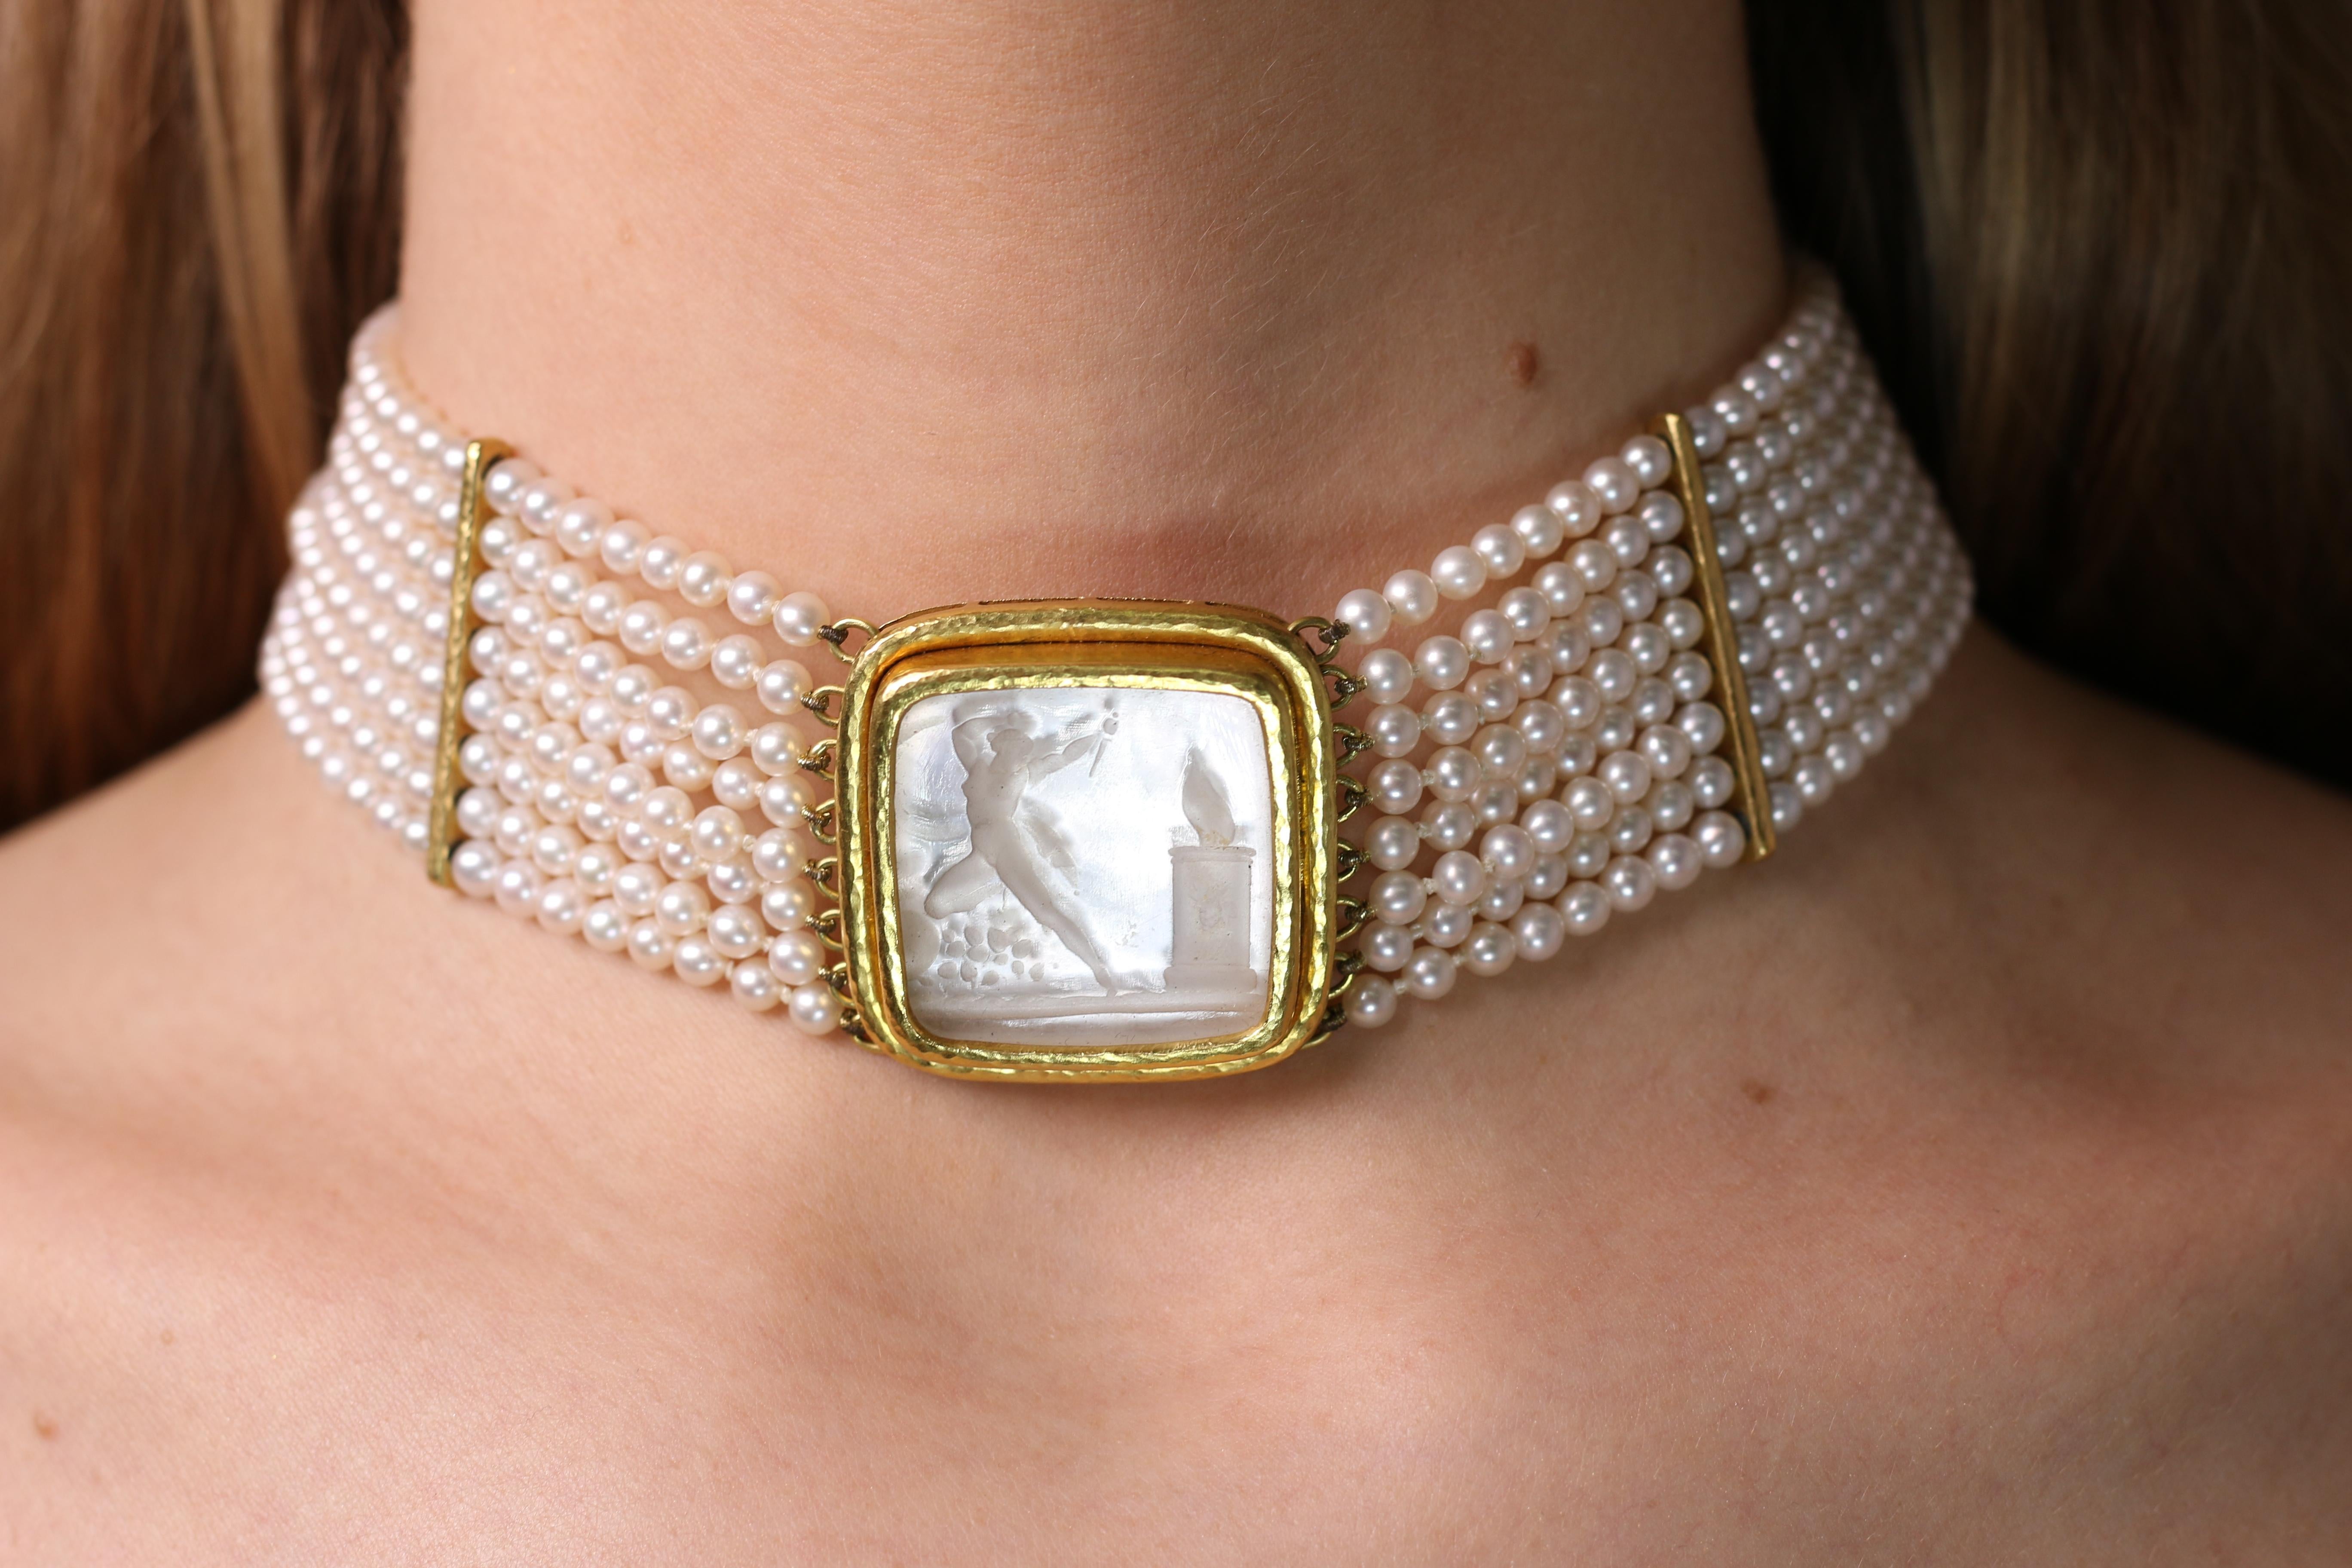 Cushion Cut Elizabeth Locke Pearl Choker with Mother of Pearl Intaglio and Gold For Sale